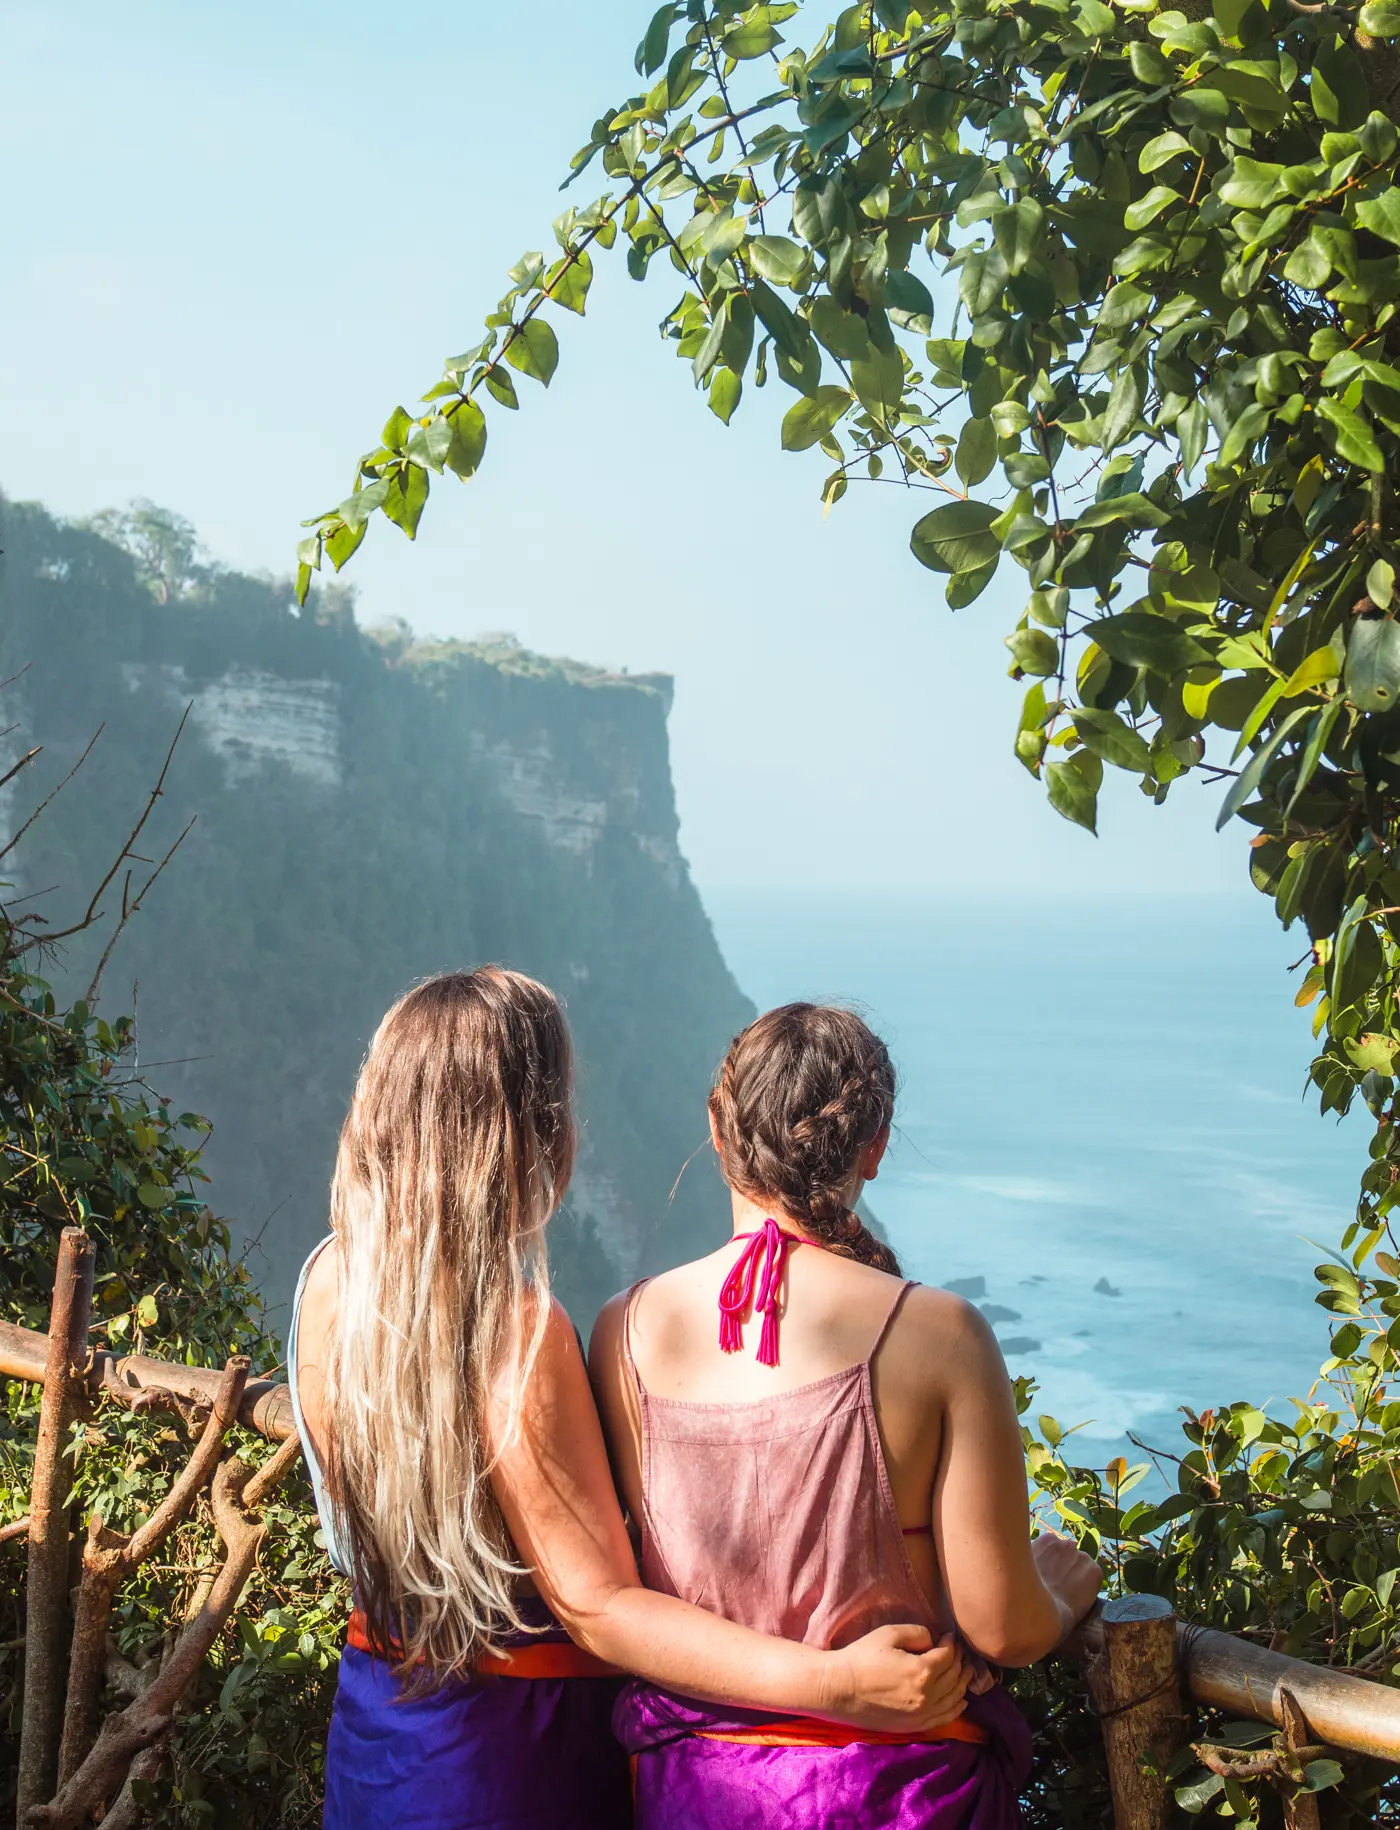 Girl with long hear wearing a blue sarong standing next to a girl wearing a pink sarong looking out over the cliffs form Uluwatu Temple.